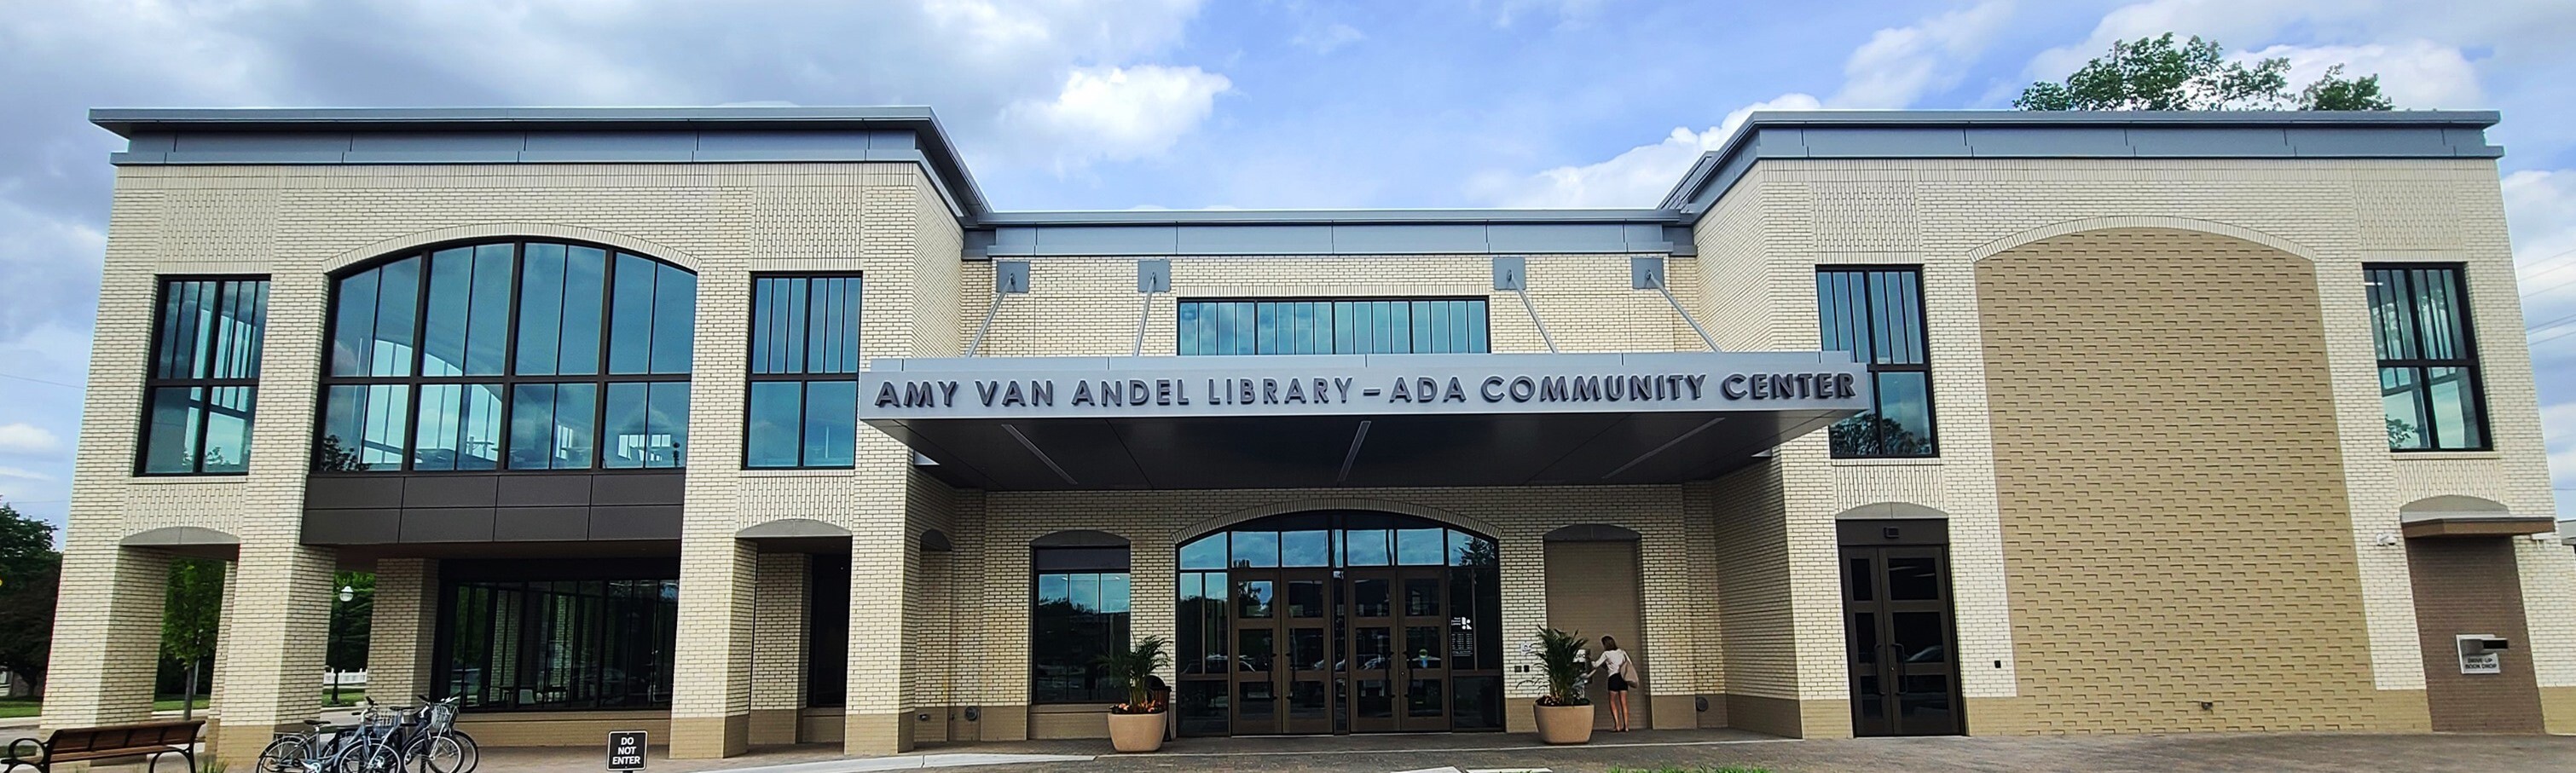 Amy Van Andel Library - Ada Community Center Podcast